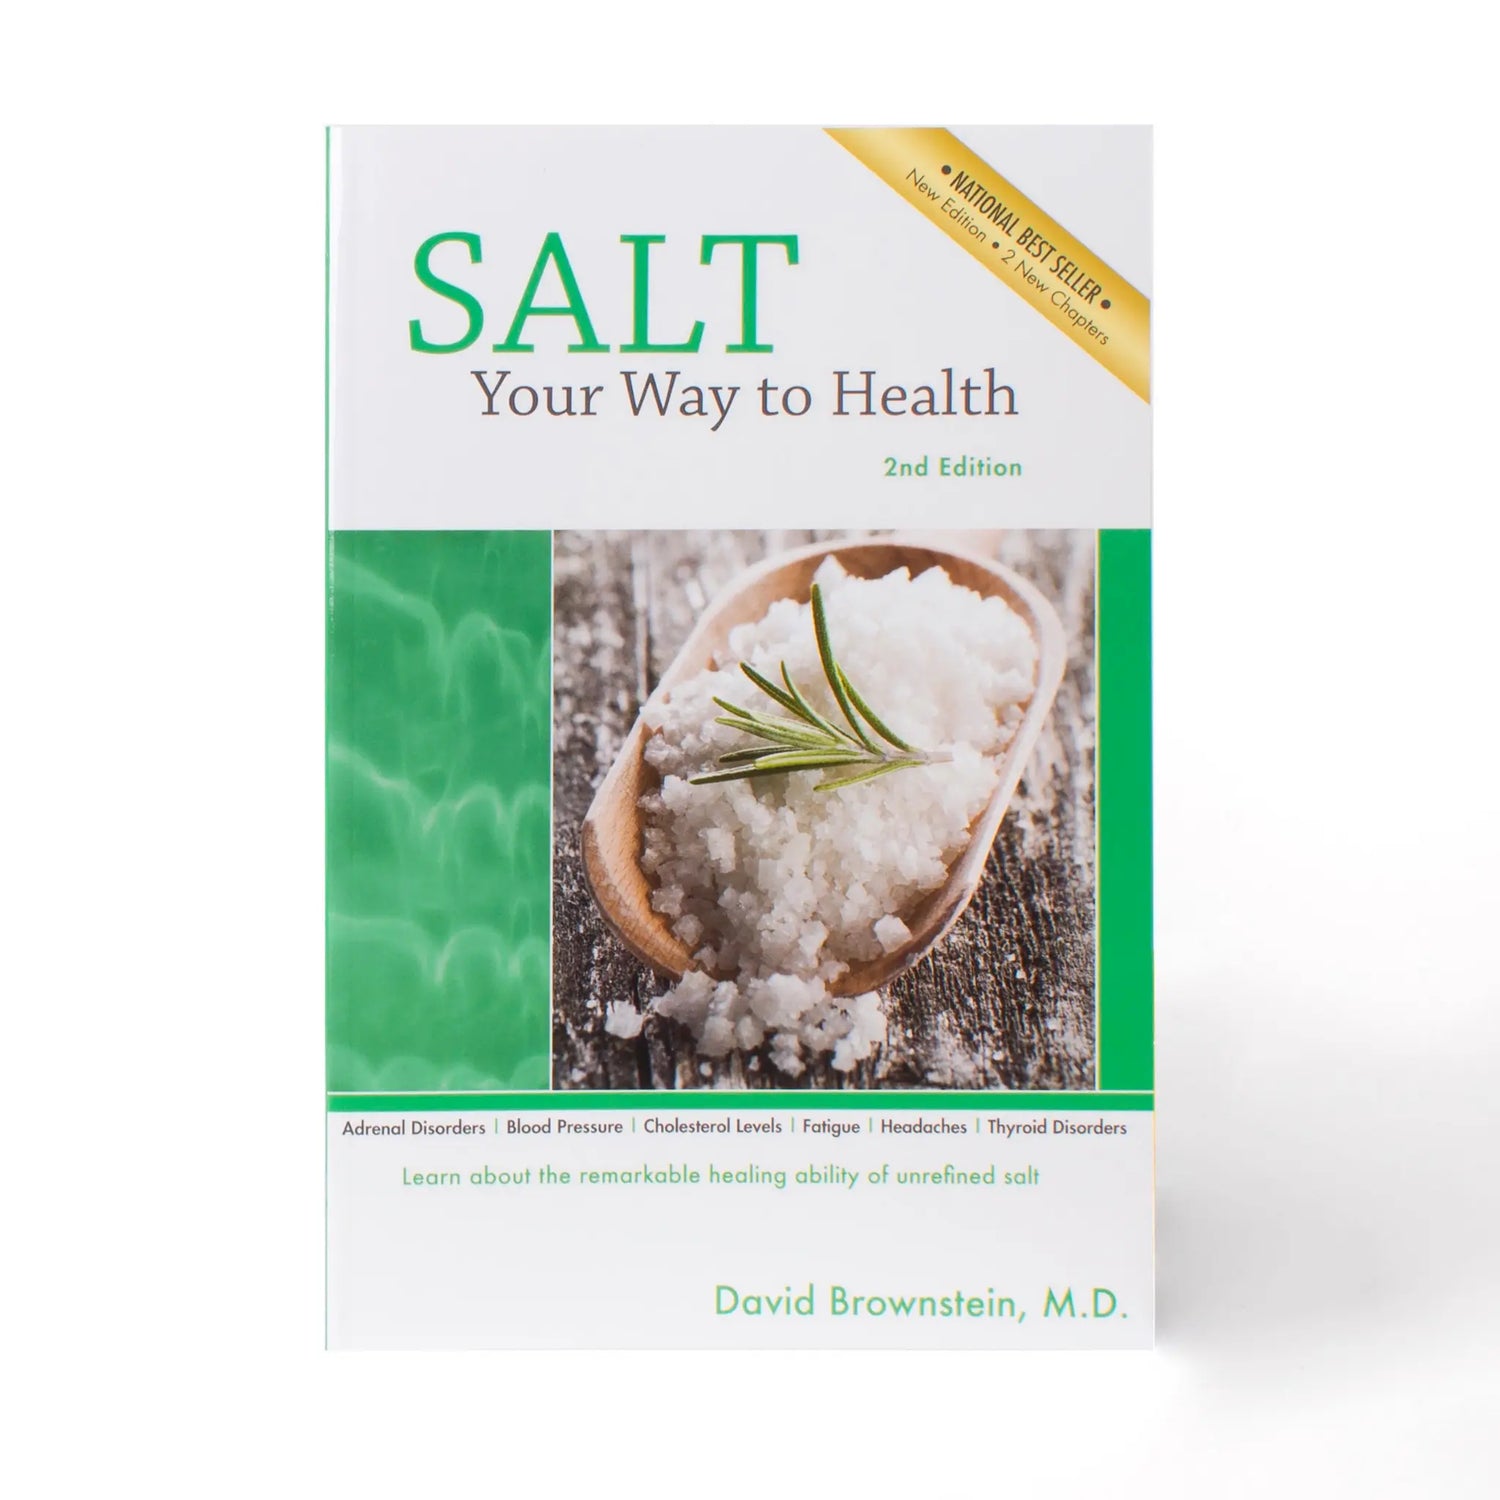 Salt Your Way to Health by Dr. Brownstein